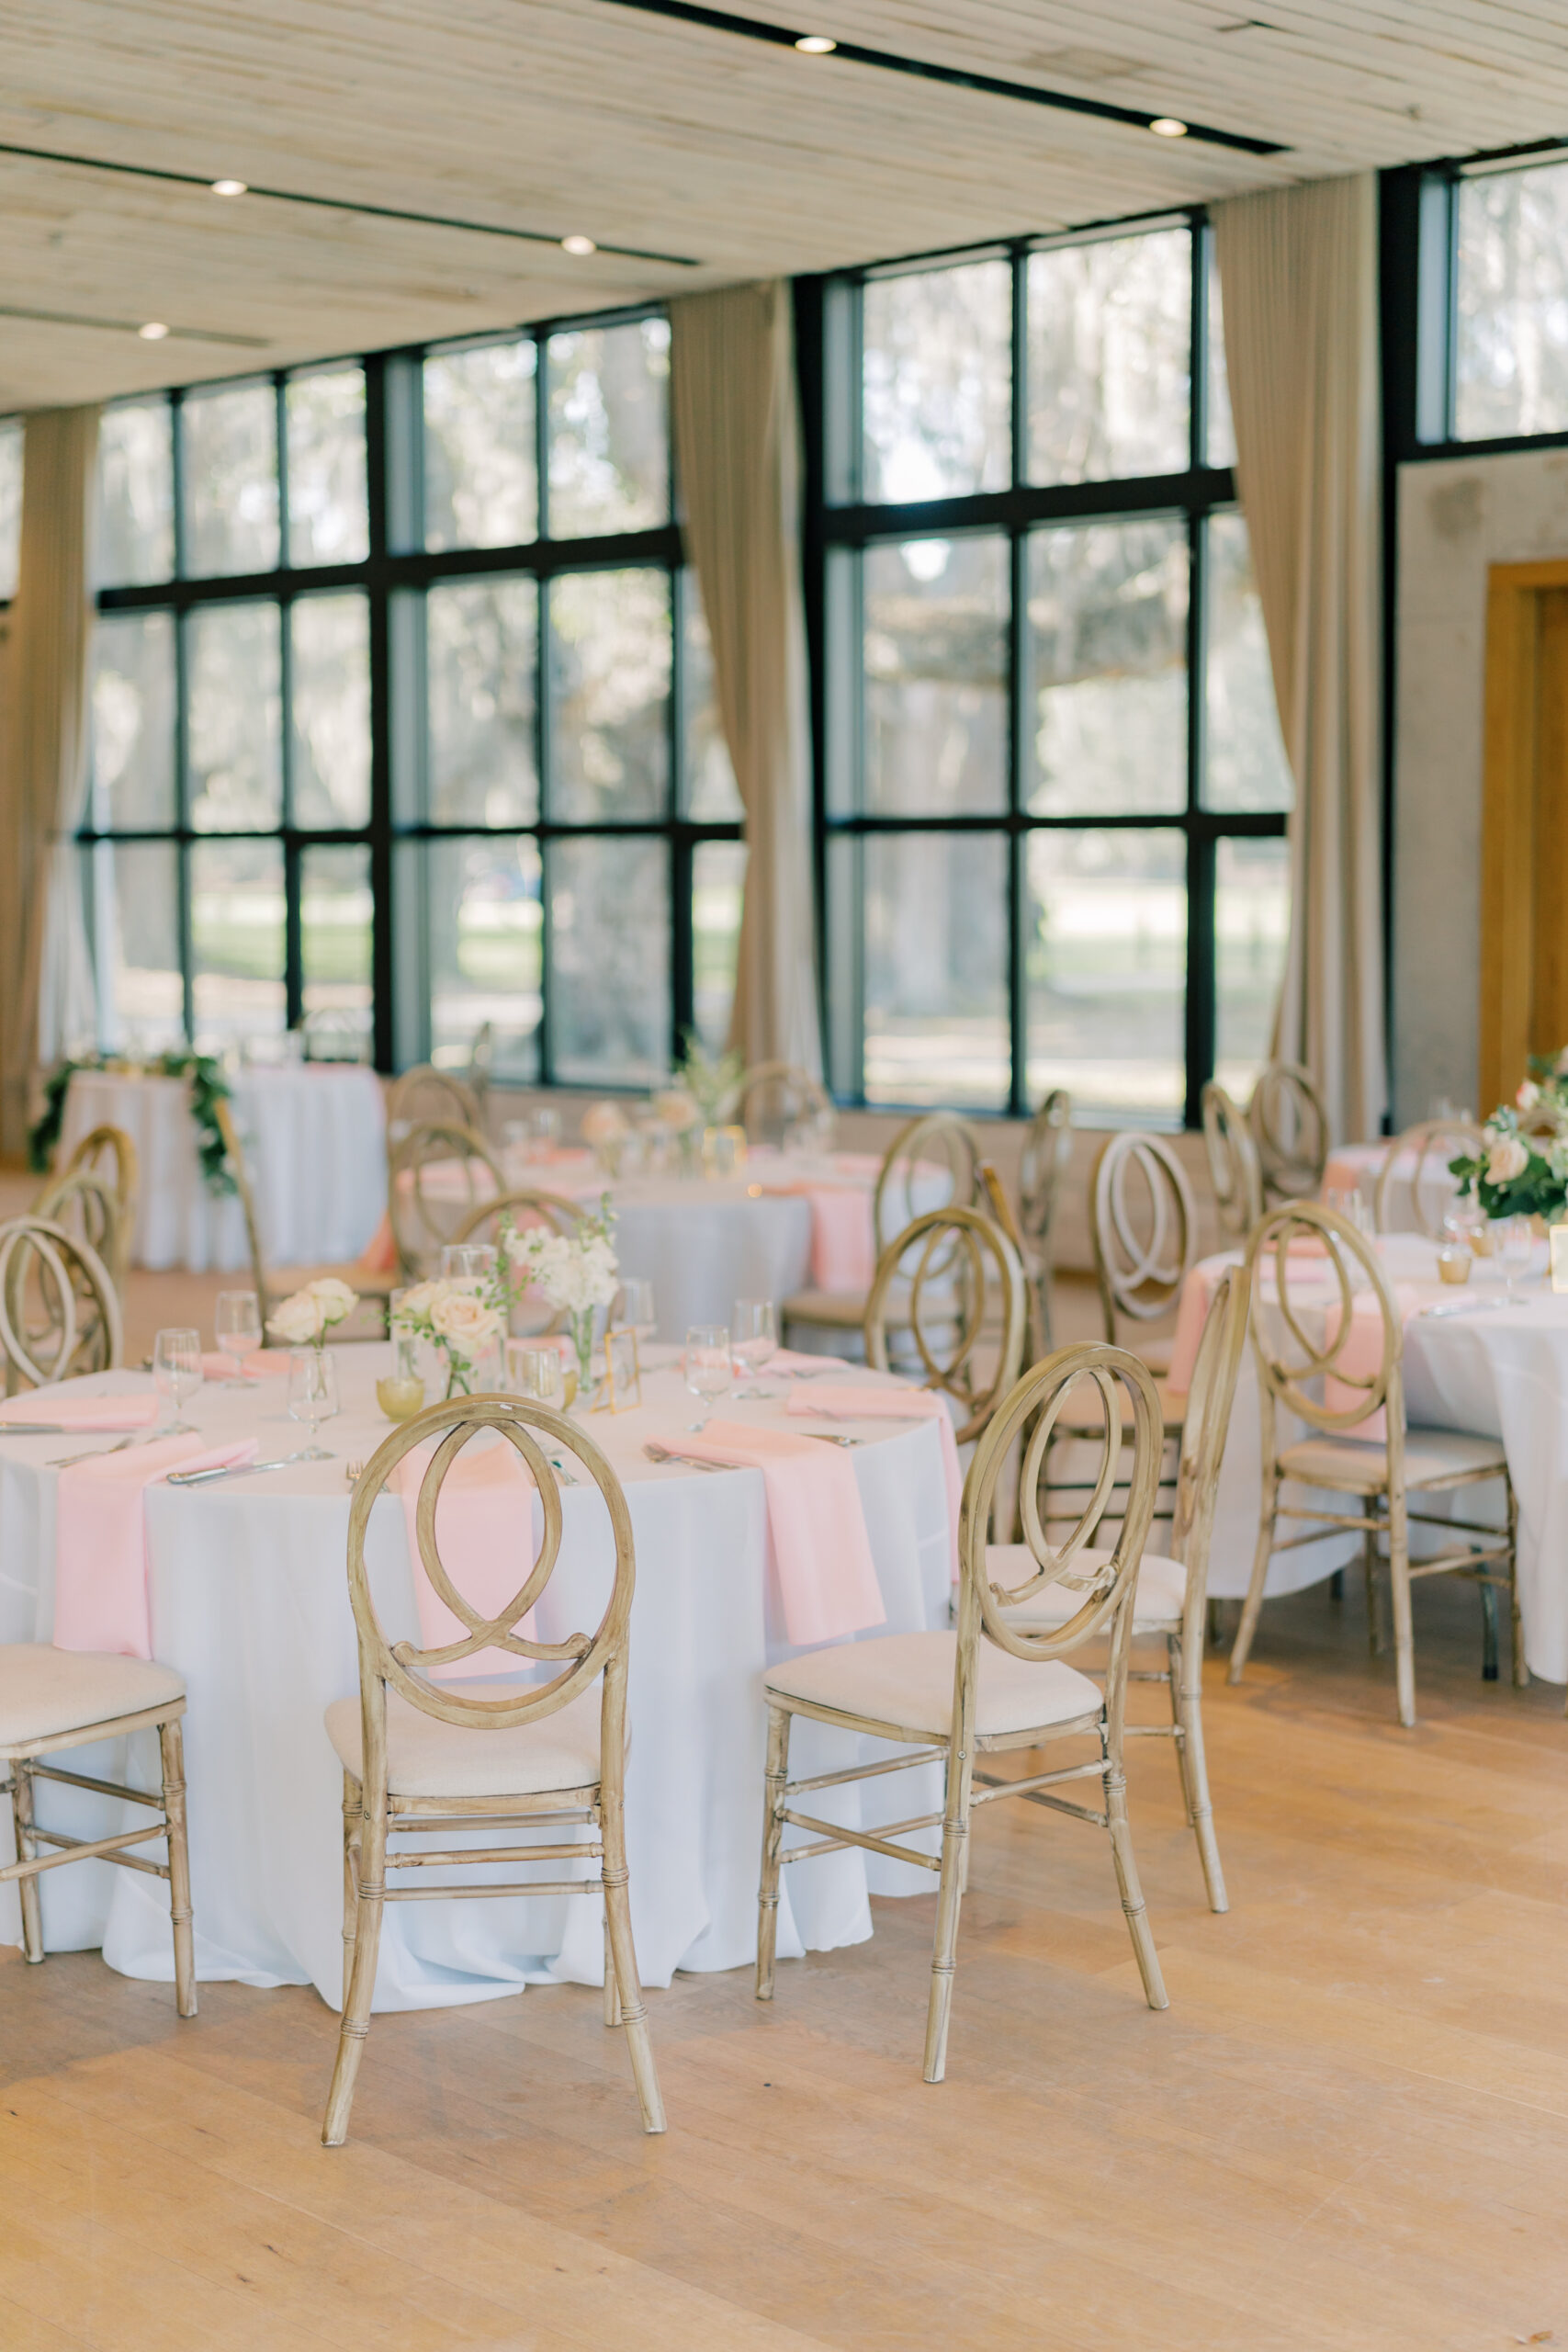 Simple wedding reception set up. White table linens with pink napkins, and small centerpieces.